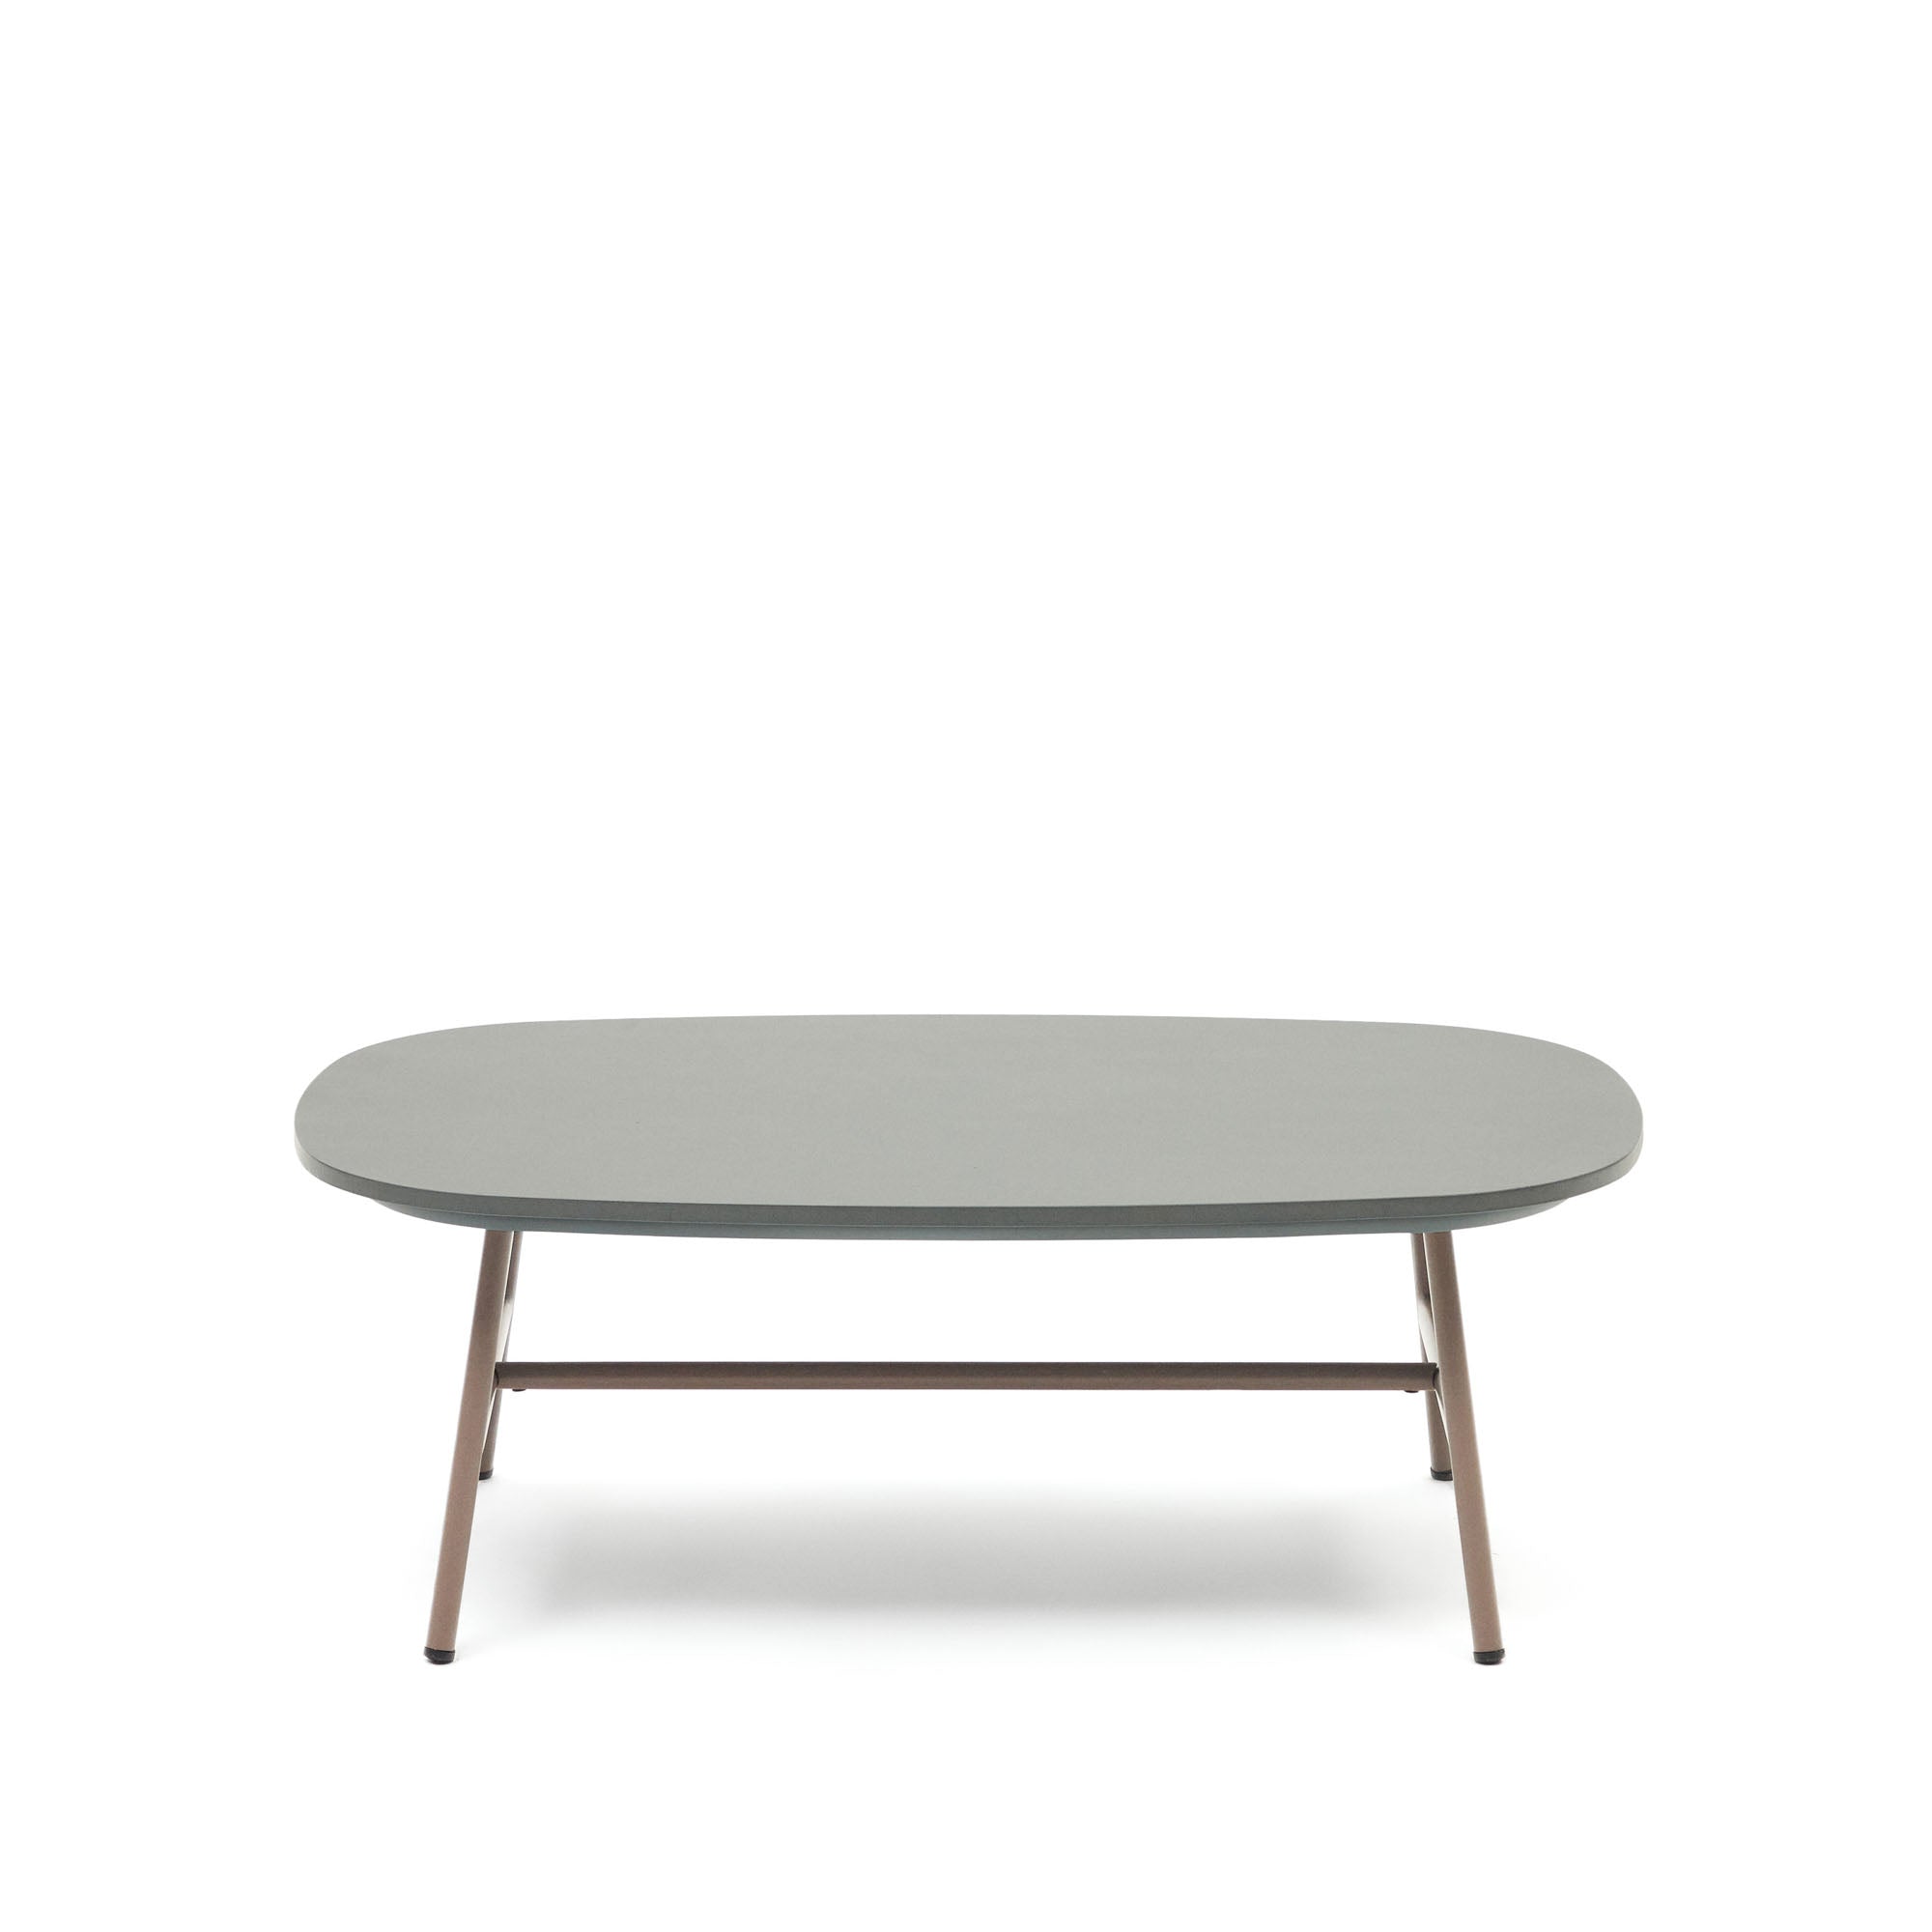 Bramant steel coffee table with mauve finish, 60 x 60 cm